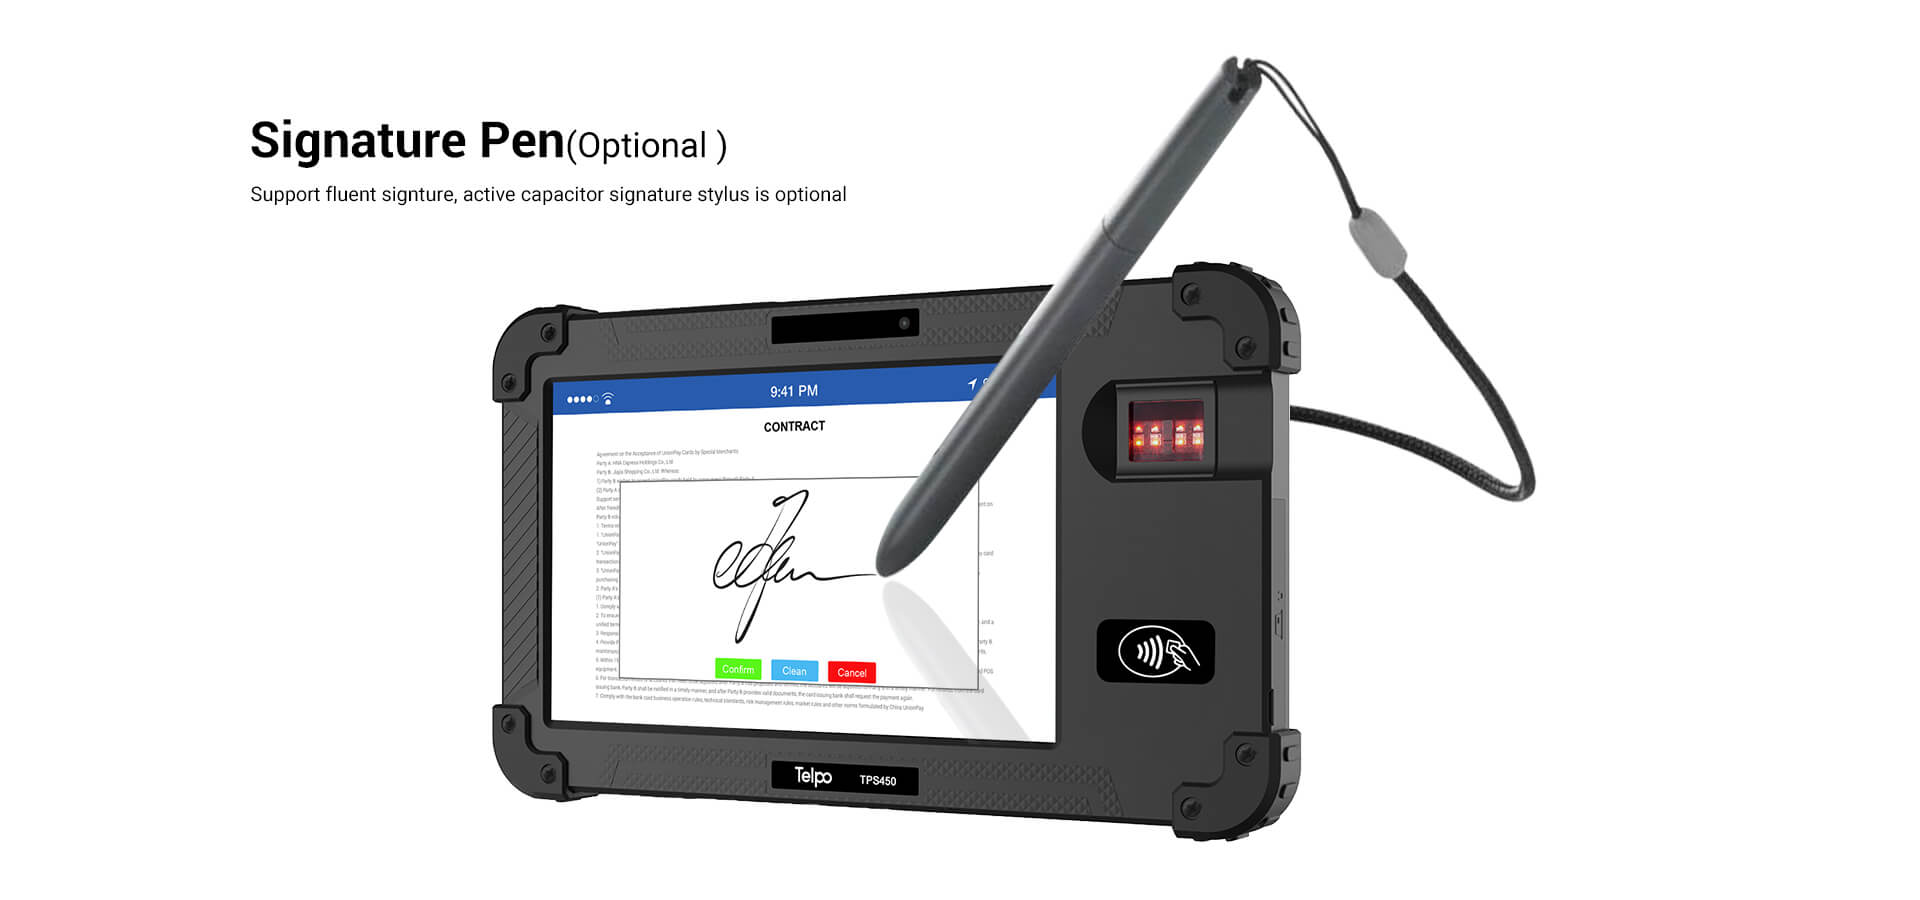 Biometric tablet with Signature pen